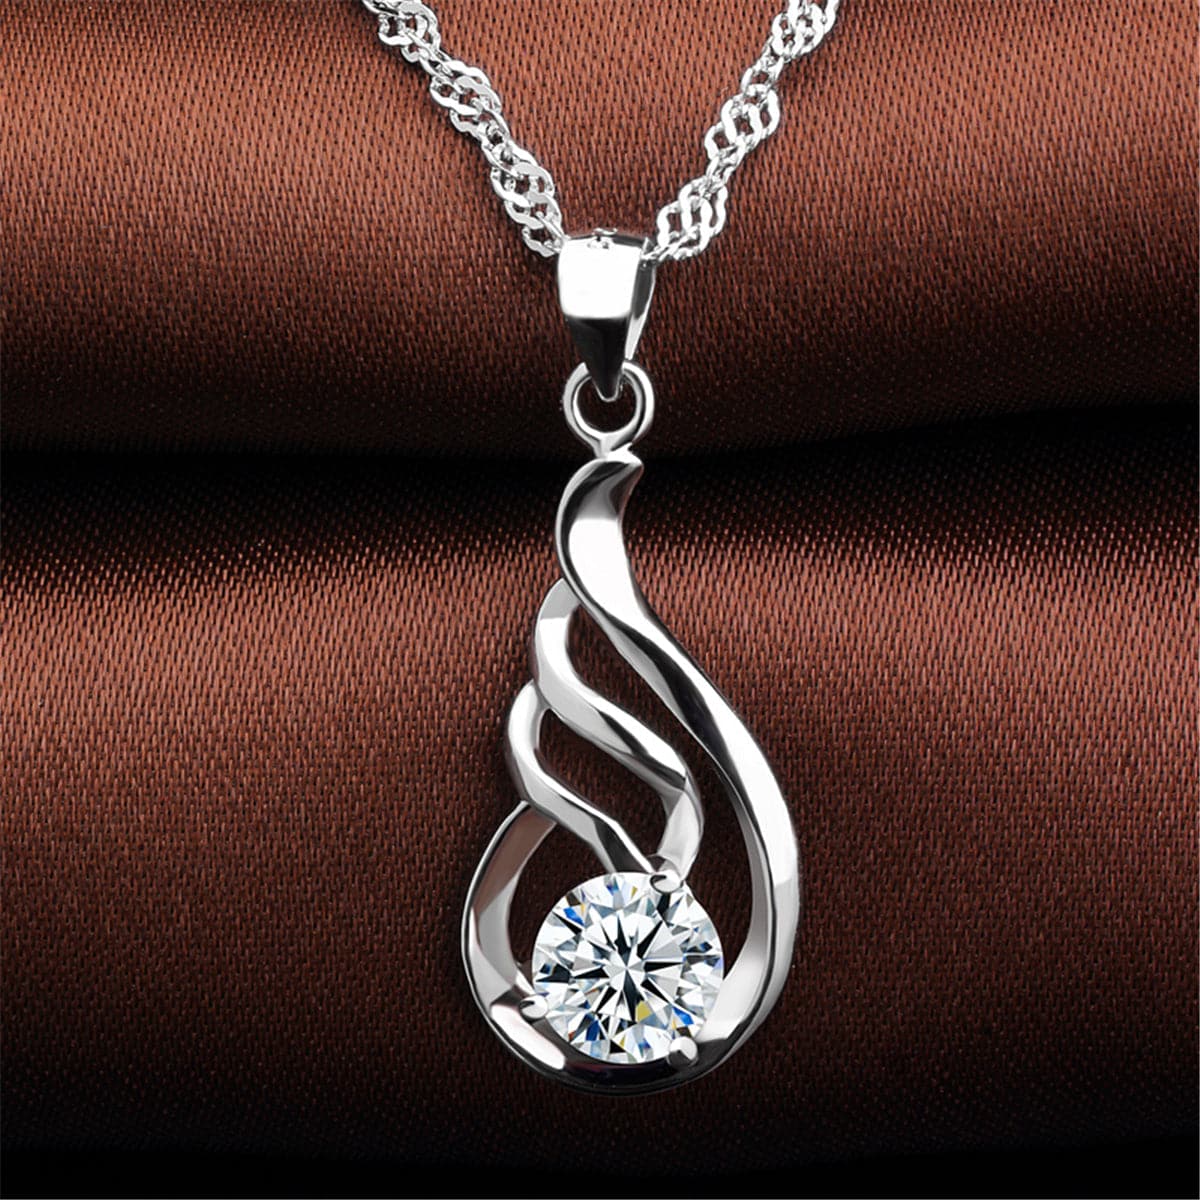 Cubic Zirconia & Sterling Silver Wing Drop Pendant Necklace